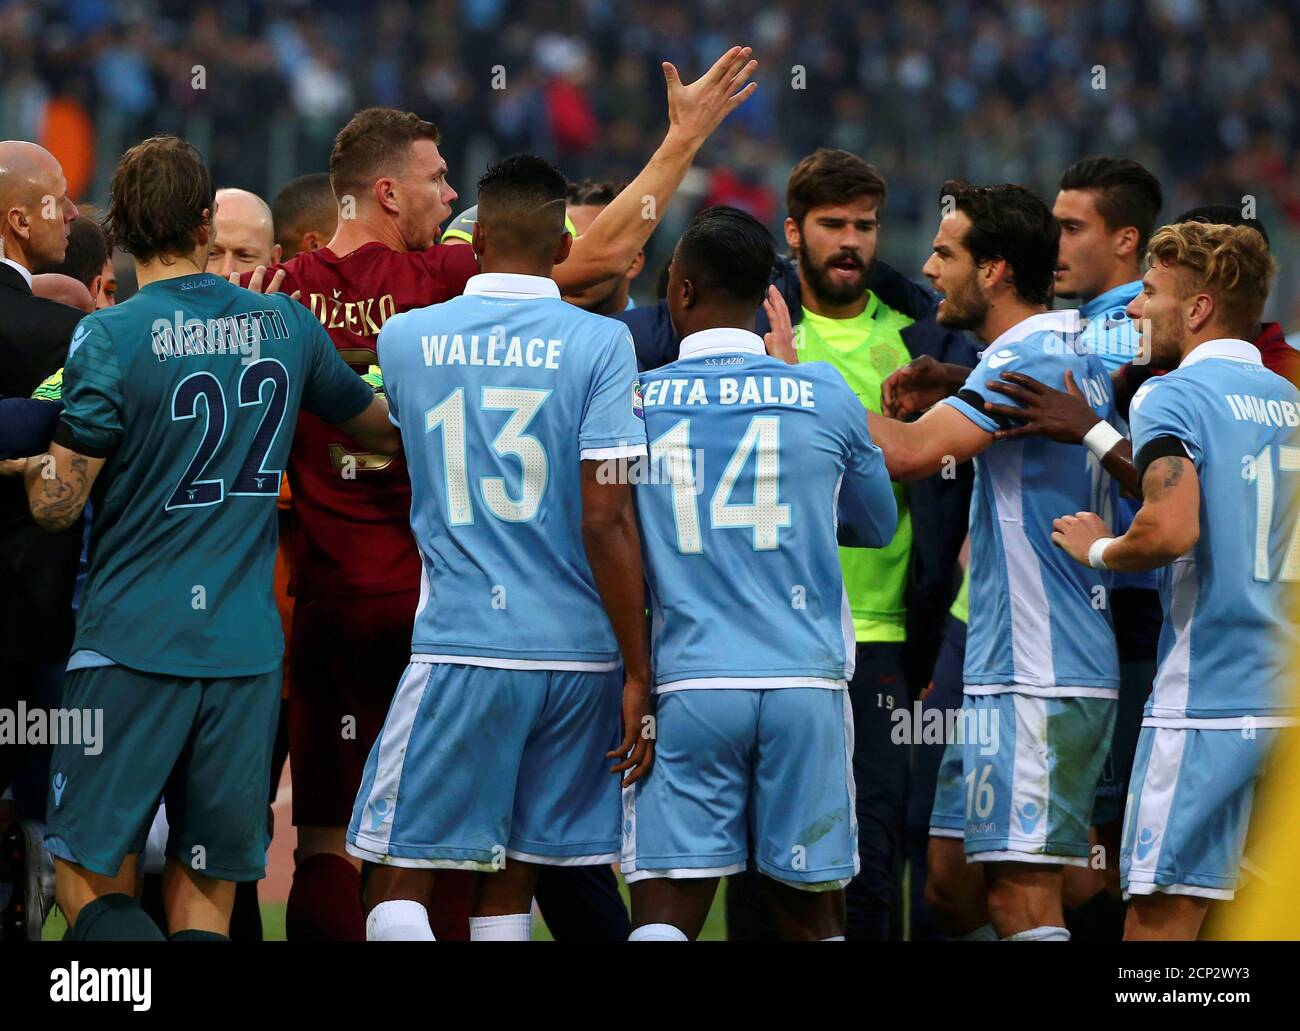 Football - Soccer - Lazio v AS Roma - Italian Serie A - Olympic Stadium, Rome, Italy - 4/12/2016. Lazio's and AS Roma's players argue during the match. REUTERS/Alessandro Bianchi Stock Photo